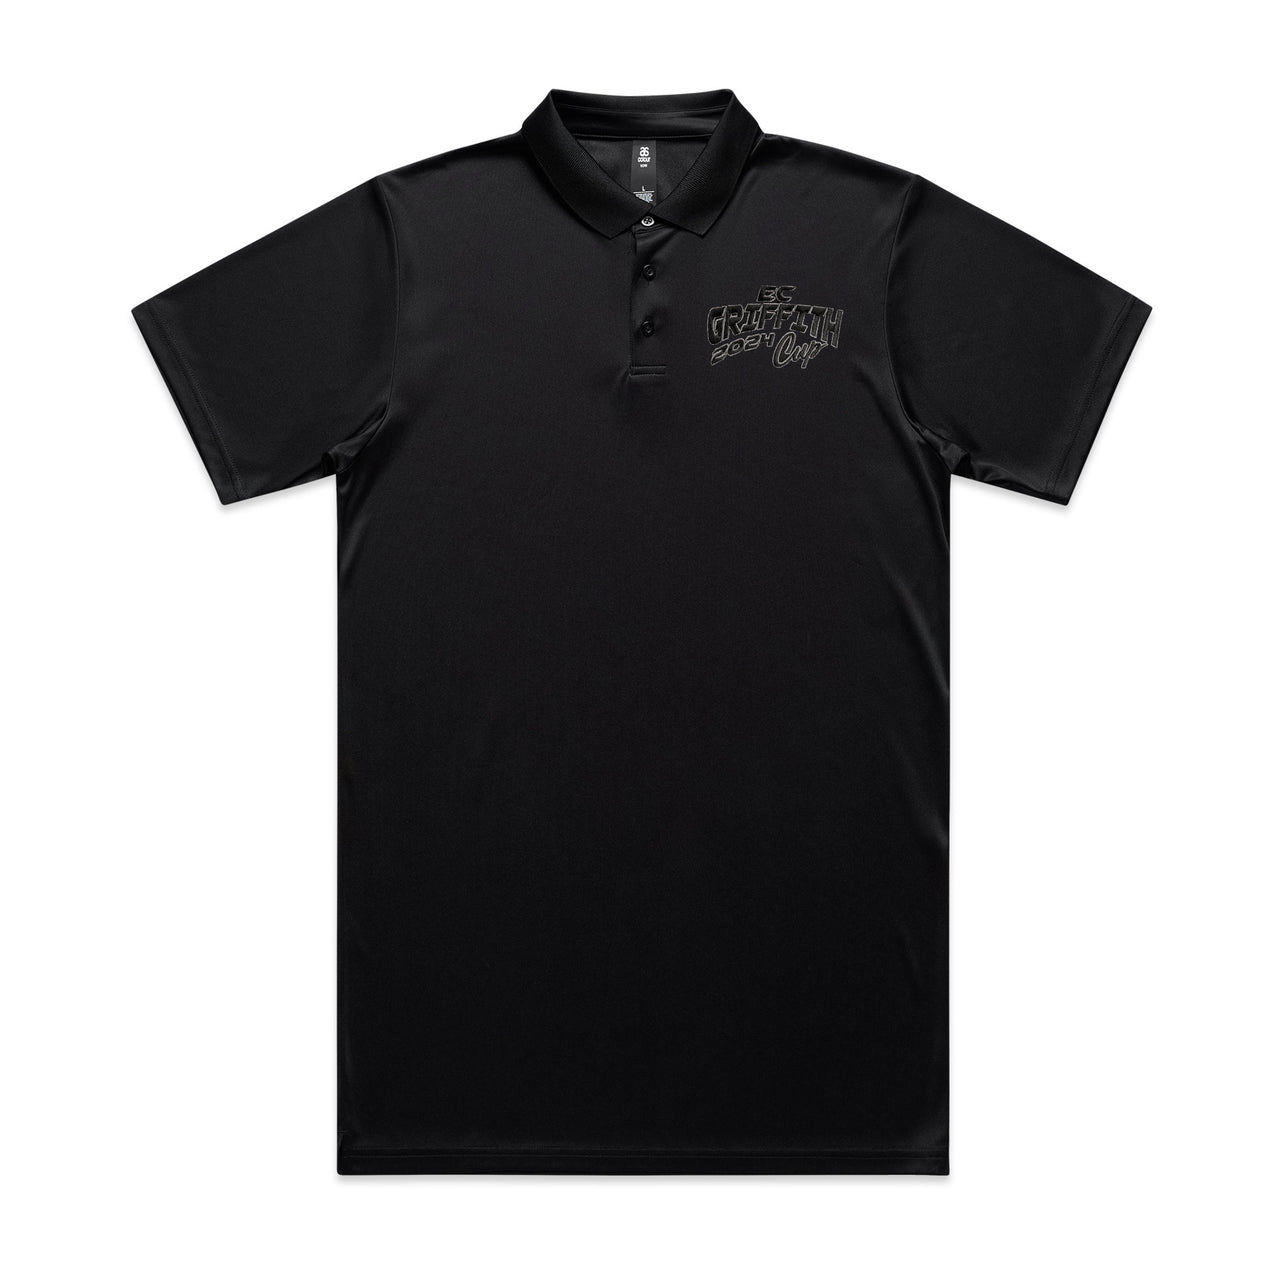 E.C Griffith Cup 2024 Mens Embroidered Polo